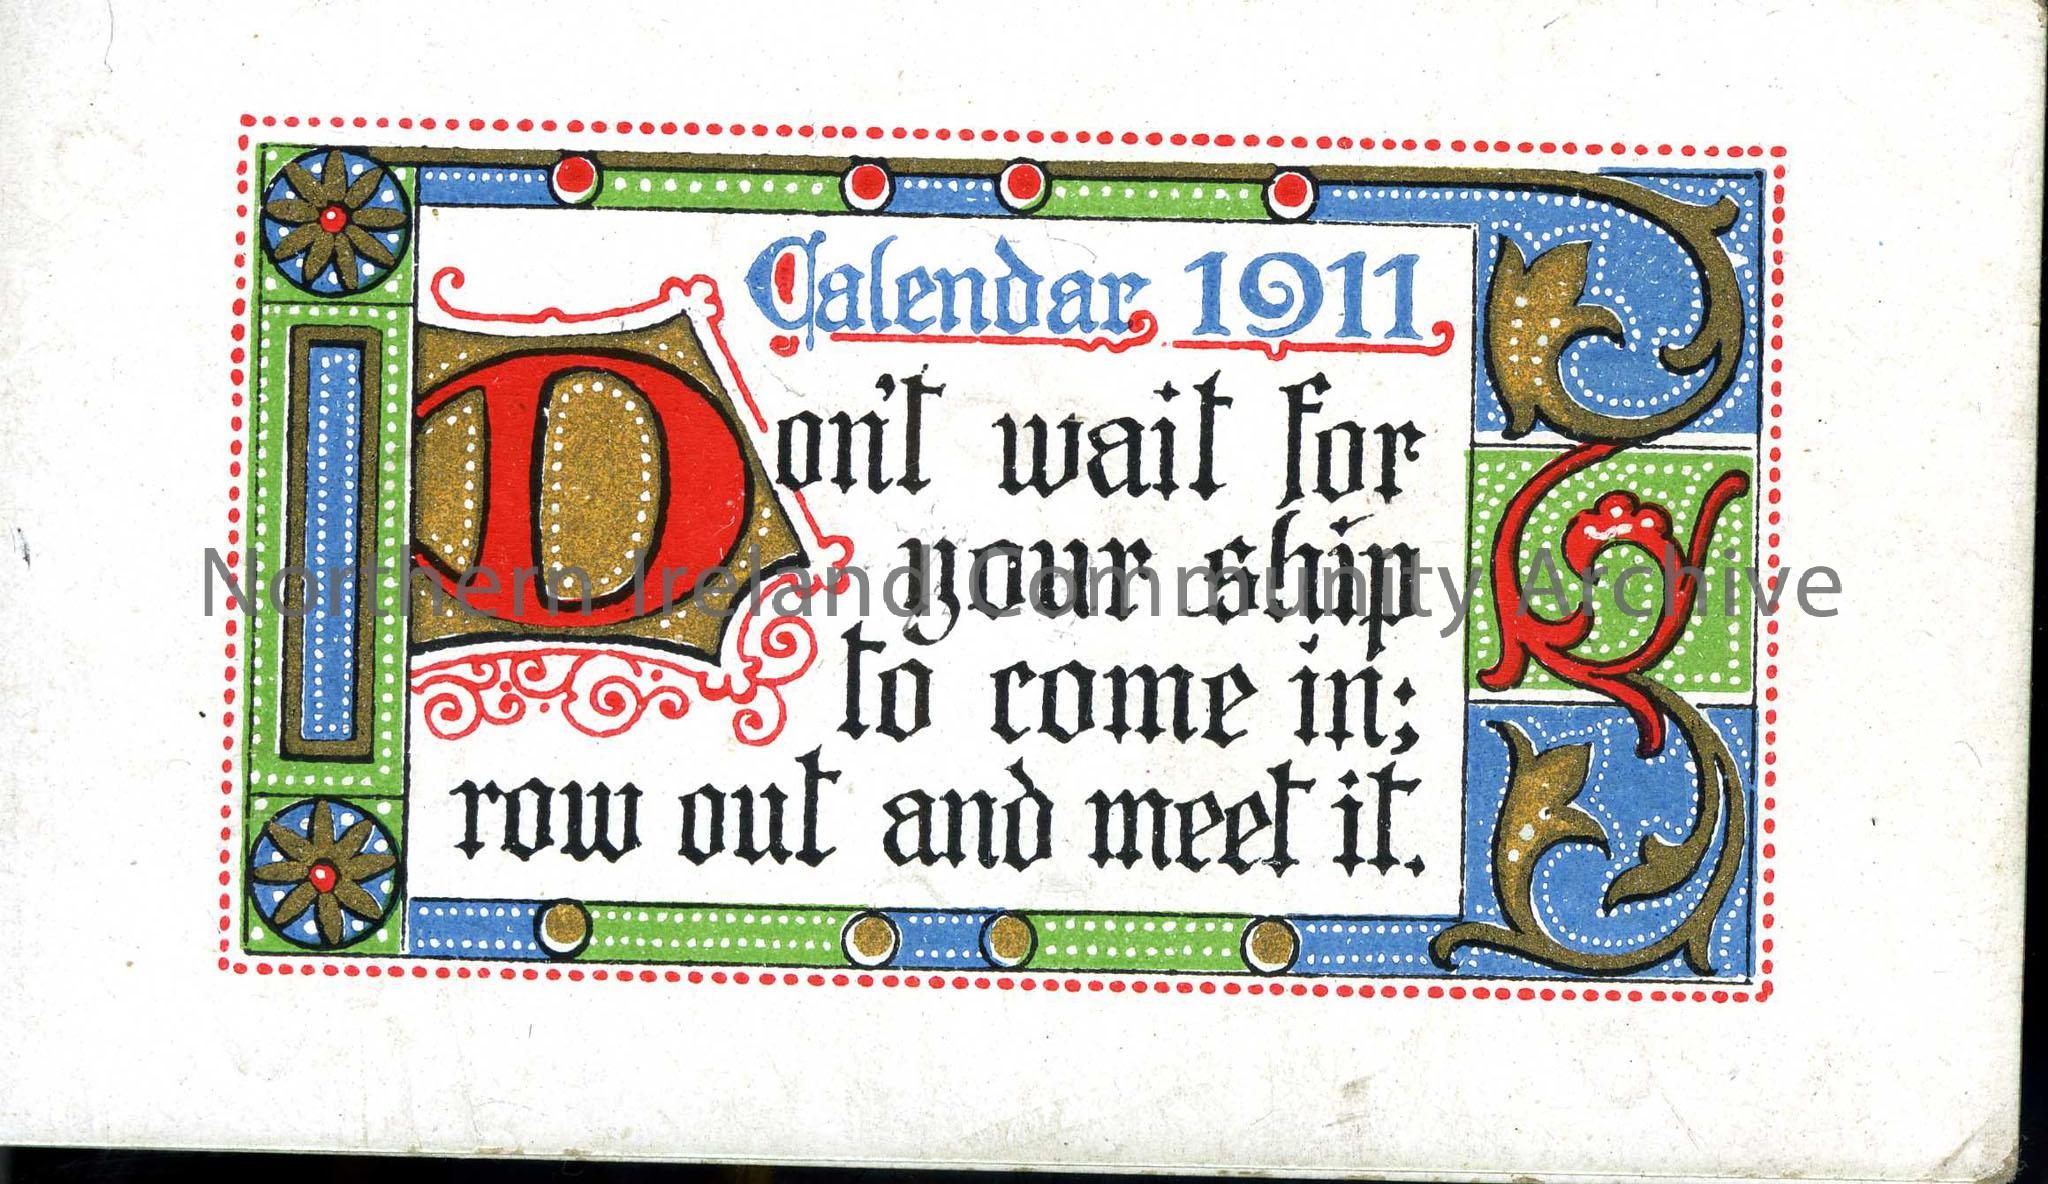 Calendar 1911 with motto. “Don’t wait for your ship to come in; row out and meet it.”